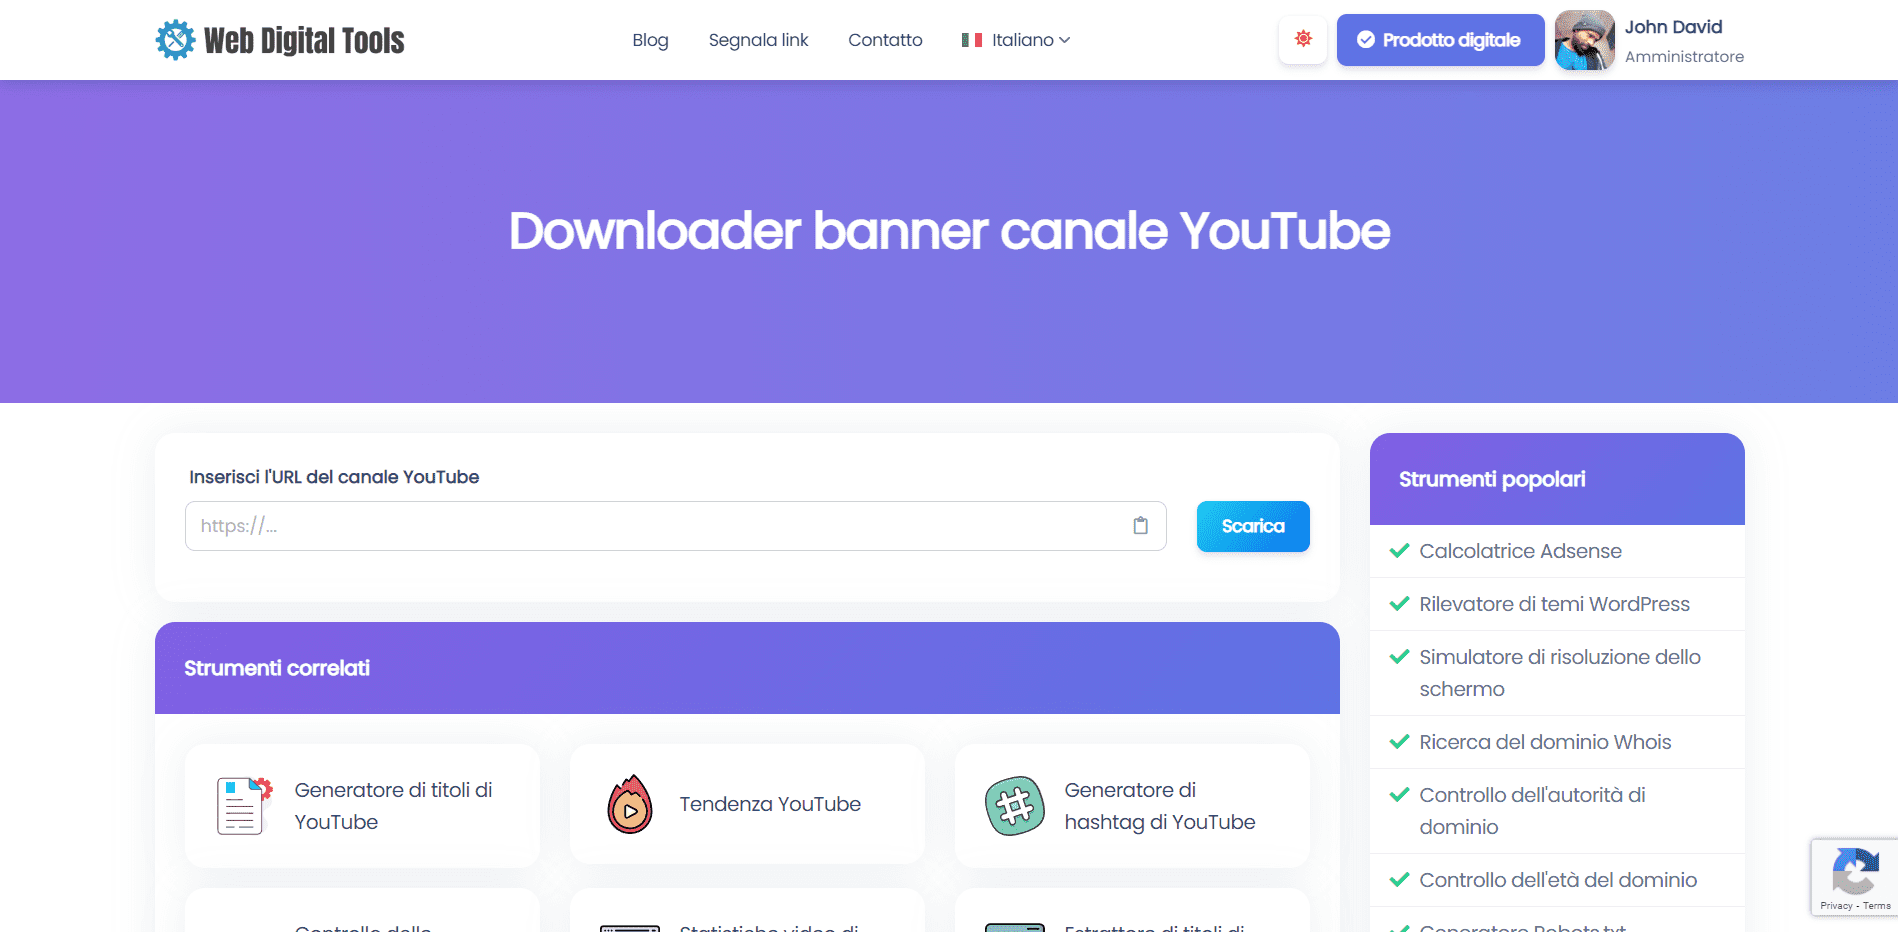 Downloader banner canale YouTube